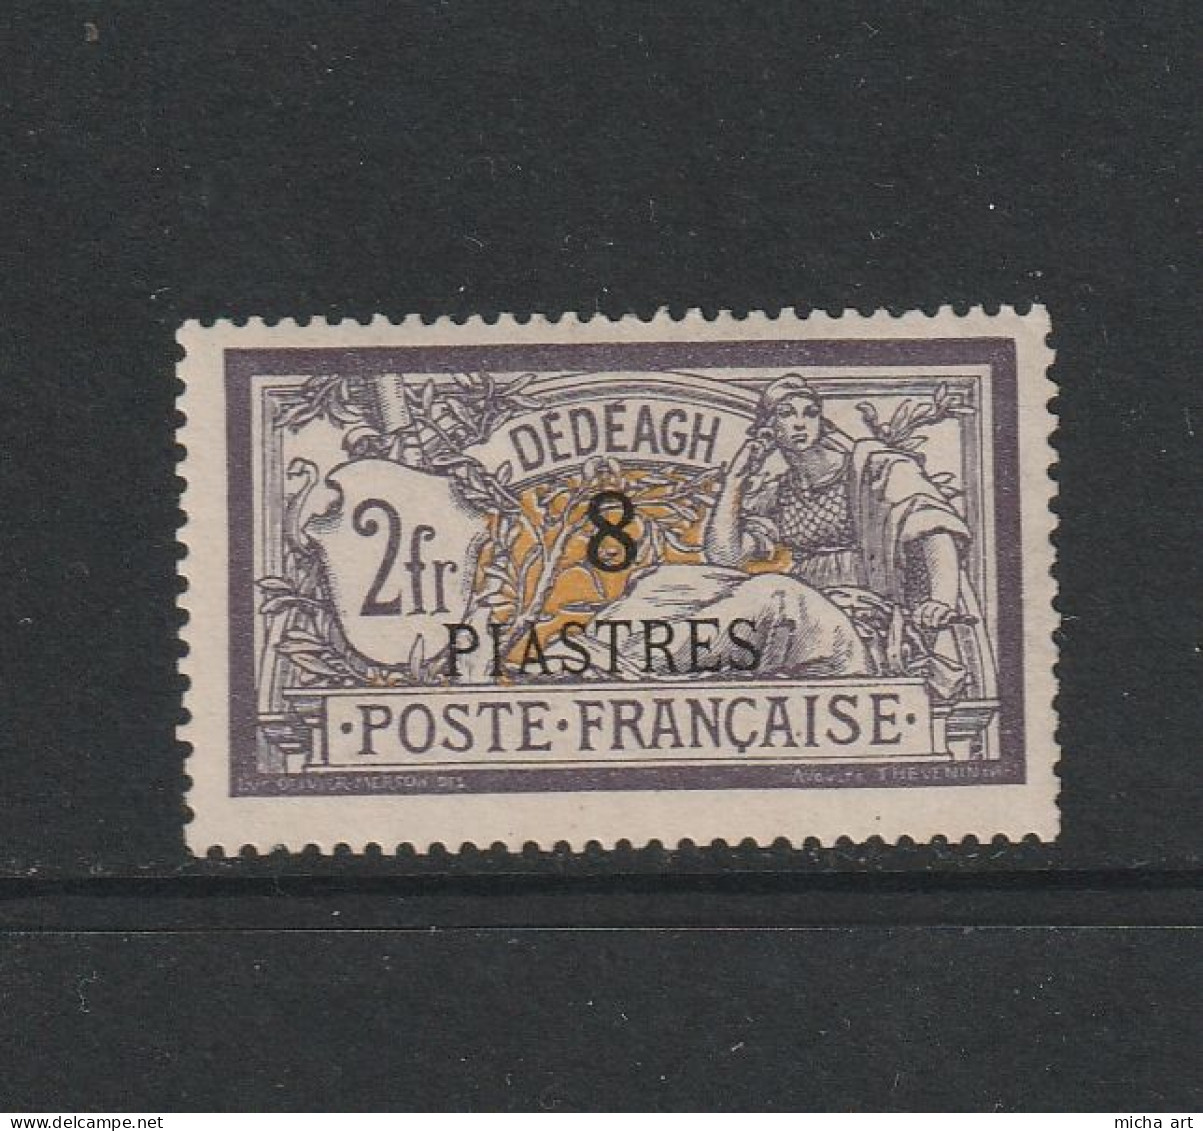 Greece French Post Office 1902 - 1913 Dedeagh Issue 8 Pi / 2 F. MH W1101 - Ongebruikt